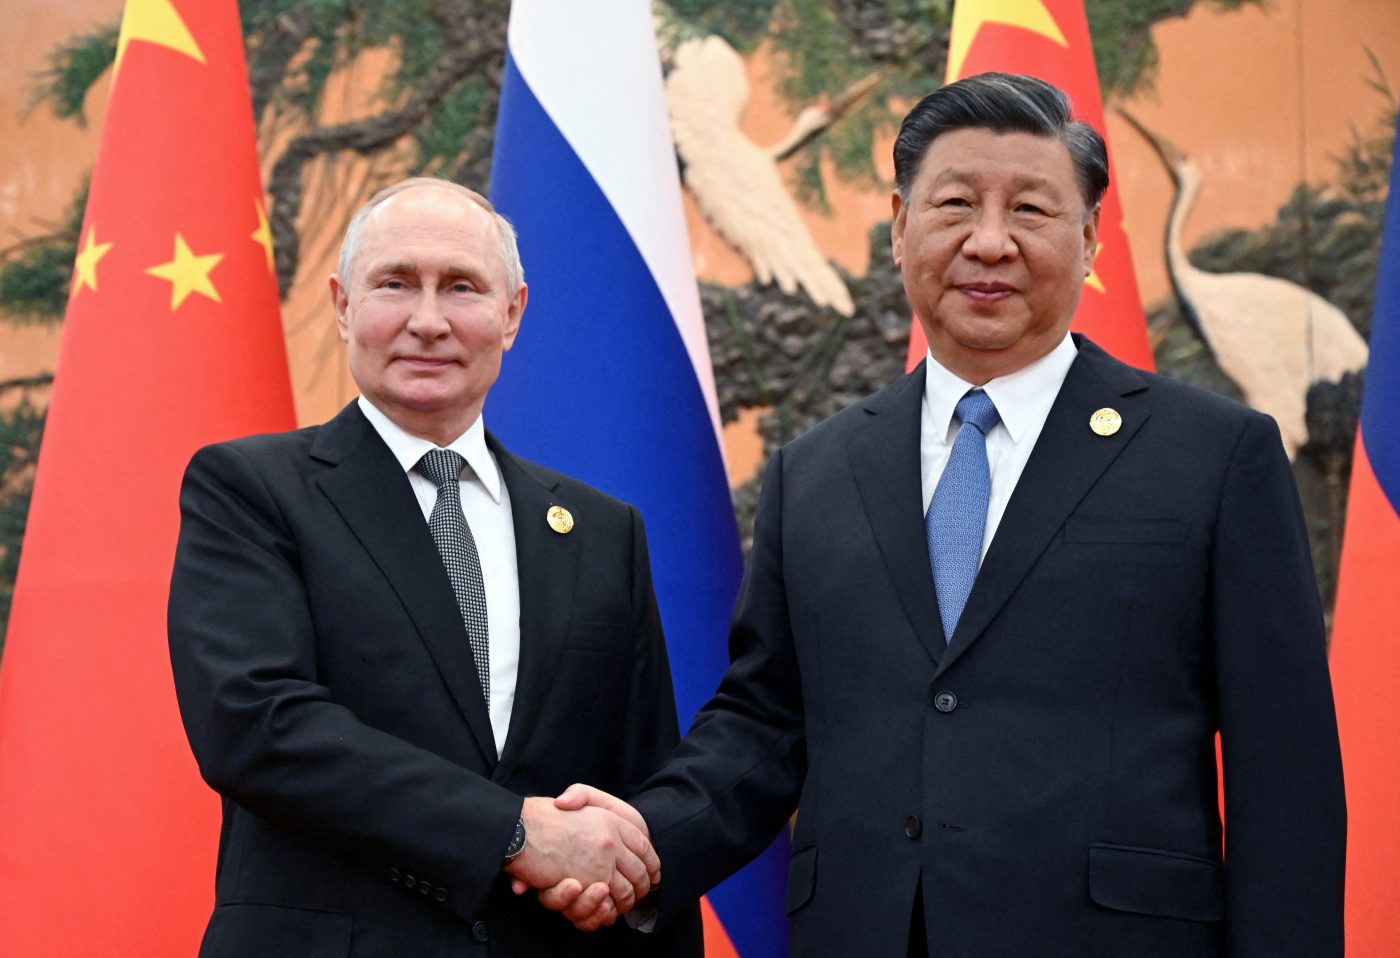 Photo: Russian President Vladimir Putin shakes hands with Chinese President Xi Jinping during a meeting at the Belt and Road Forum in Beijing, China, October 18, 2023. Credit: Sputnik/Sergei Guneev/Pool via REUTERS